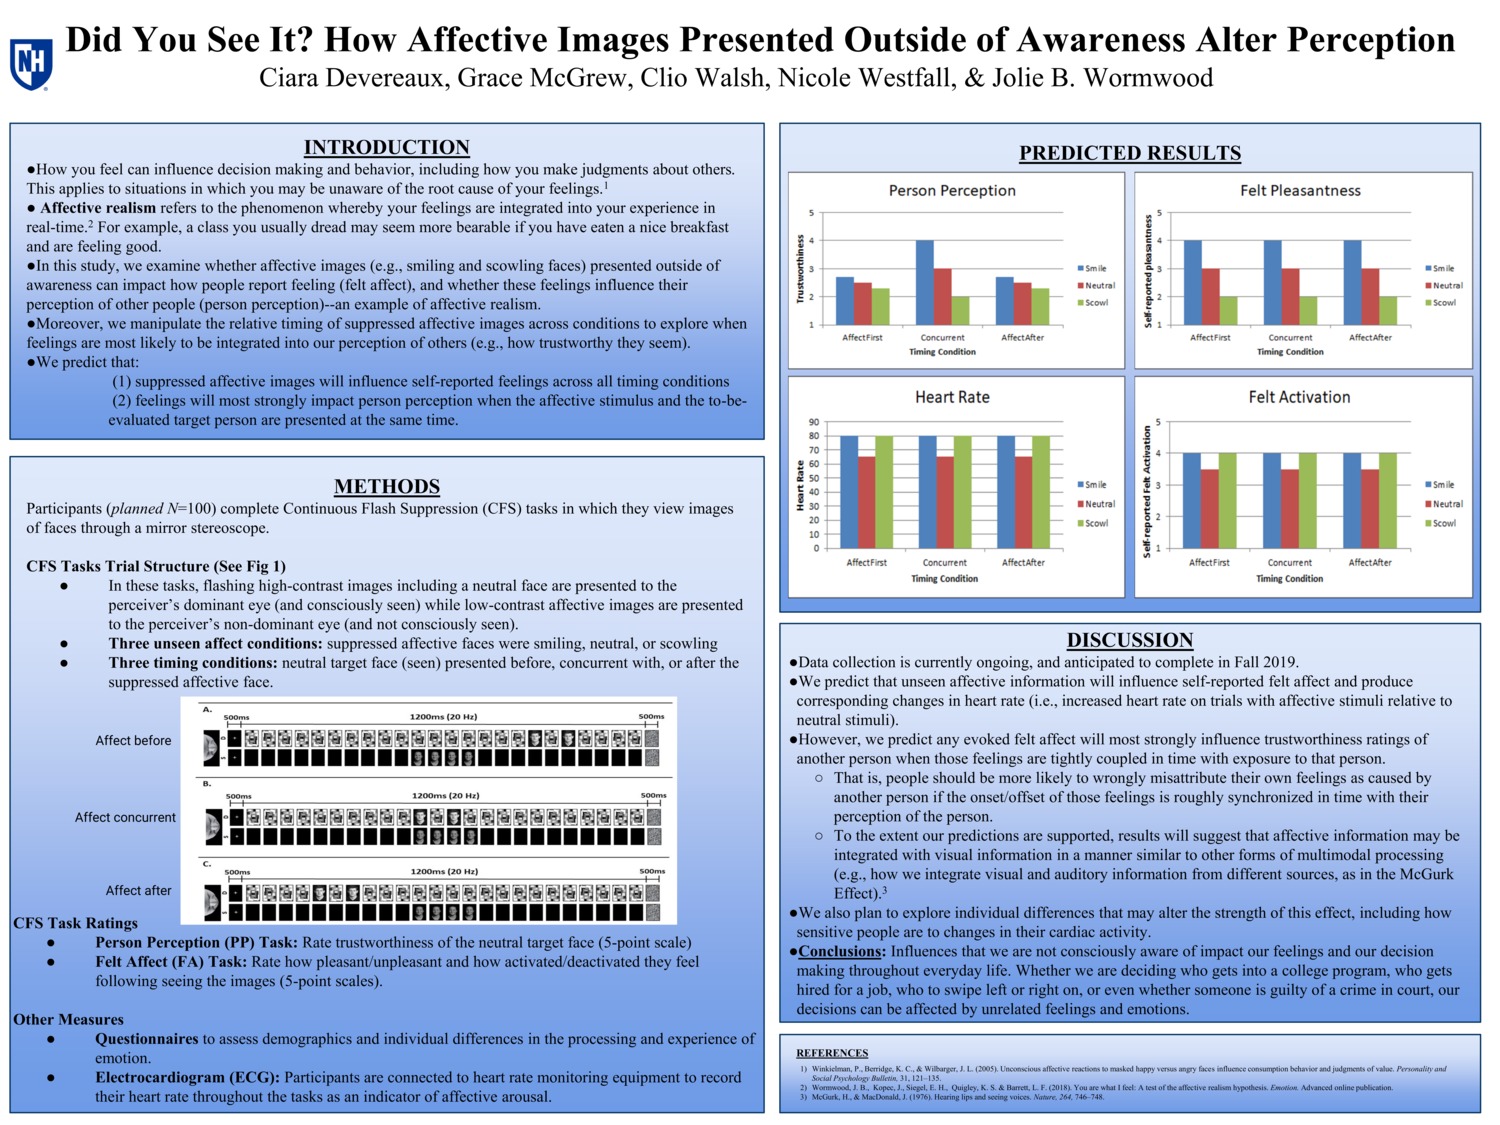 Did You See It? How Affective Images Presented Outside Of Awareness Alter Perception by jbwormwood